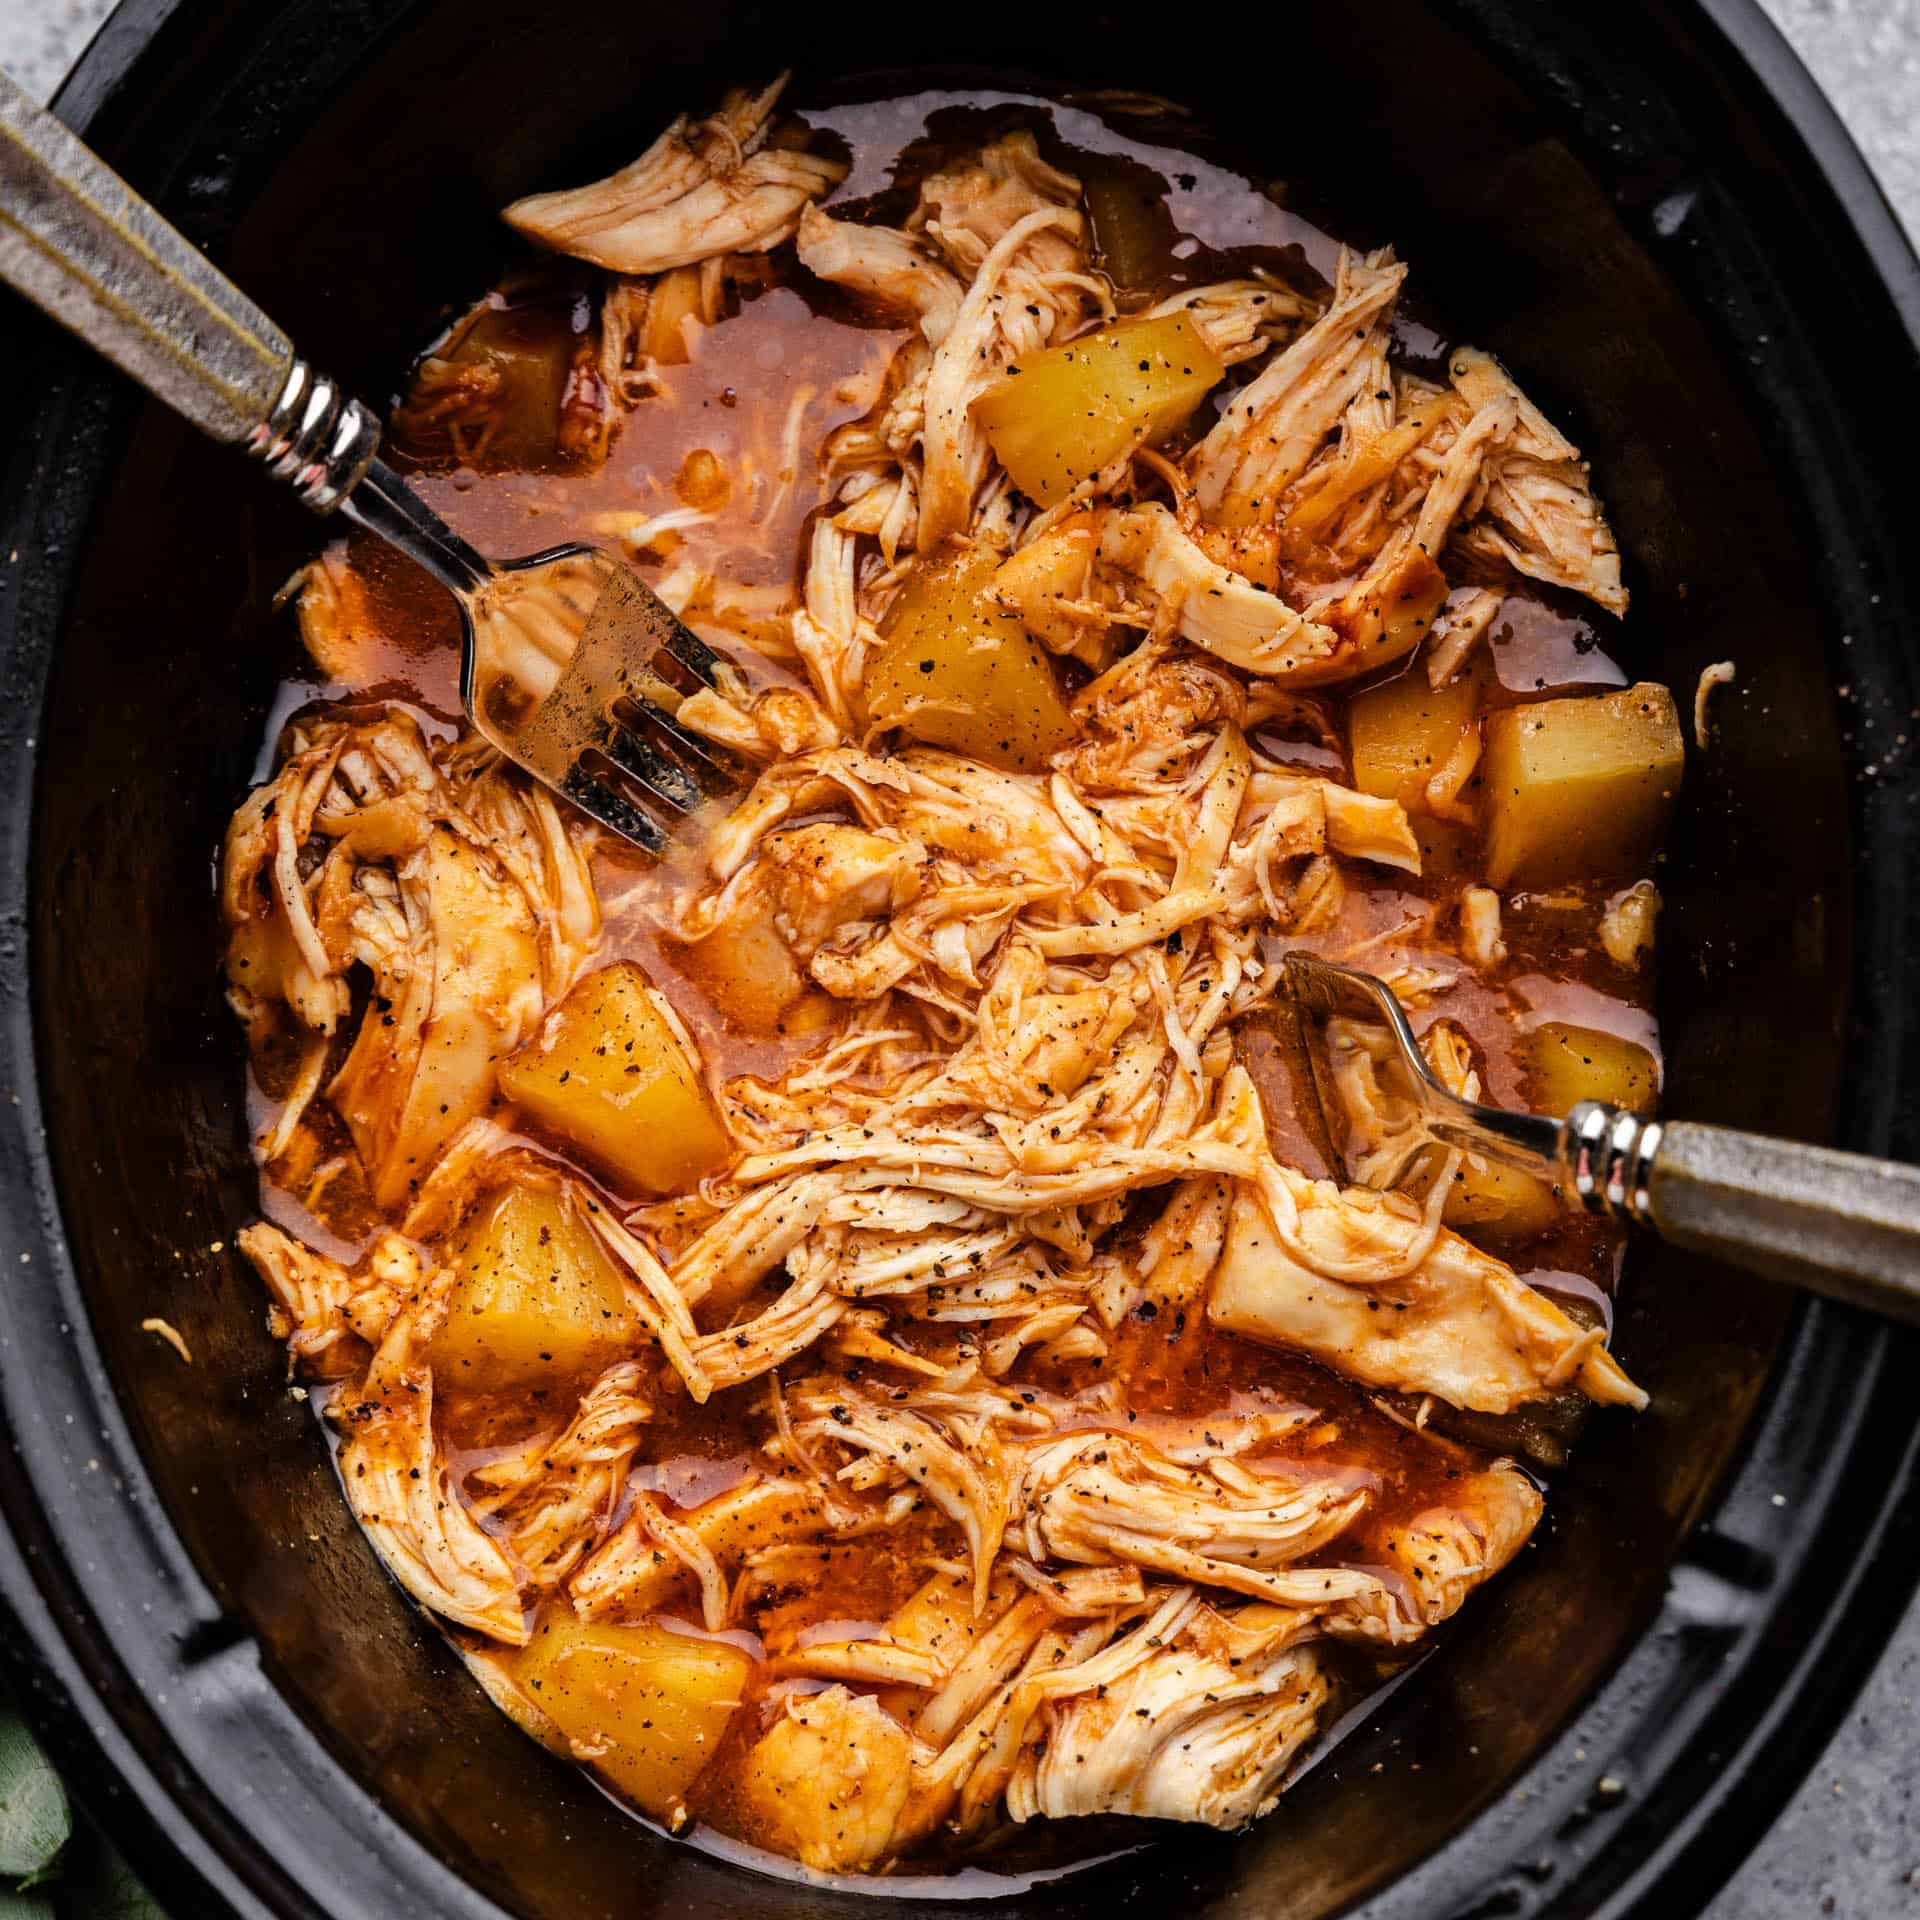 An overhead view looking into a slow cooker full of shredded chicken in a homemade BBQ sauce with pineapple.